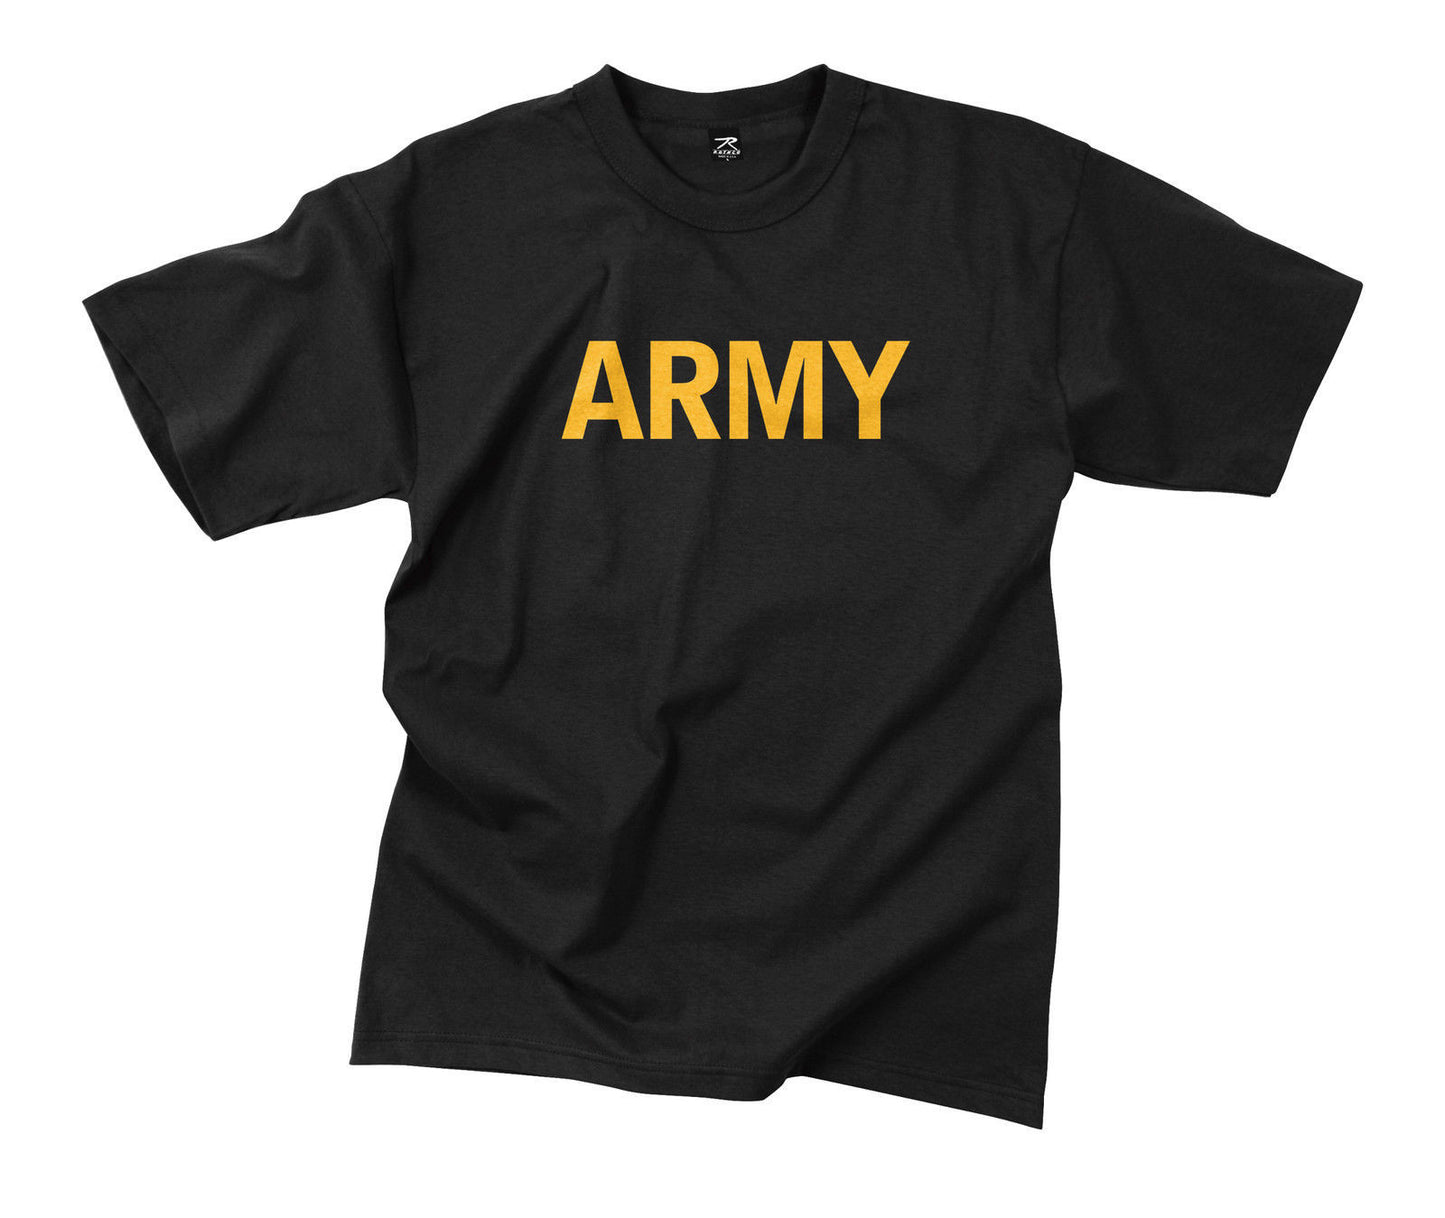 Black Army T-Shirt With Gold Army Print